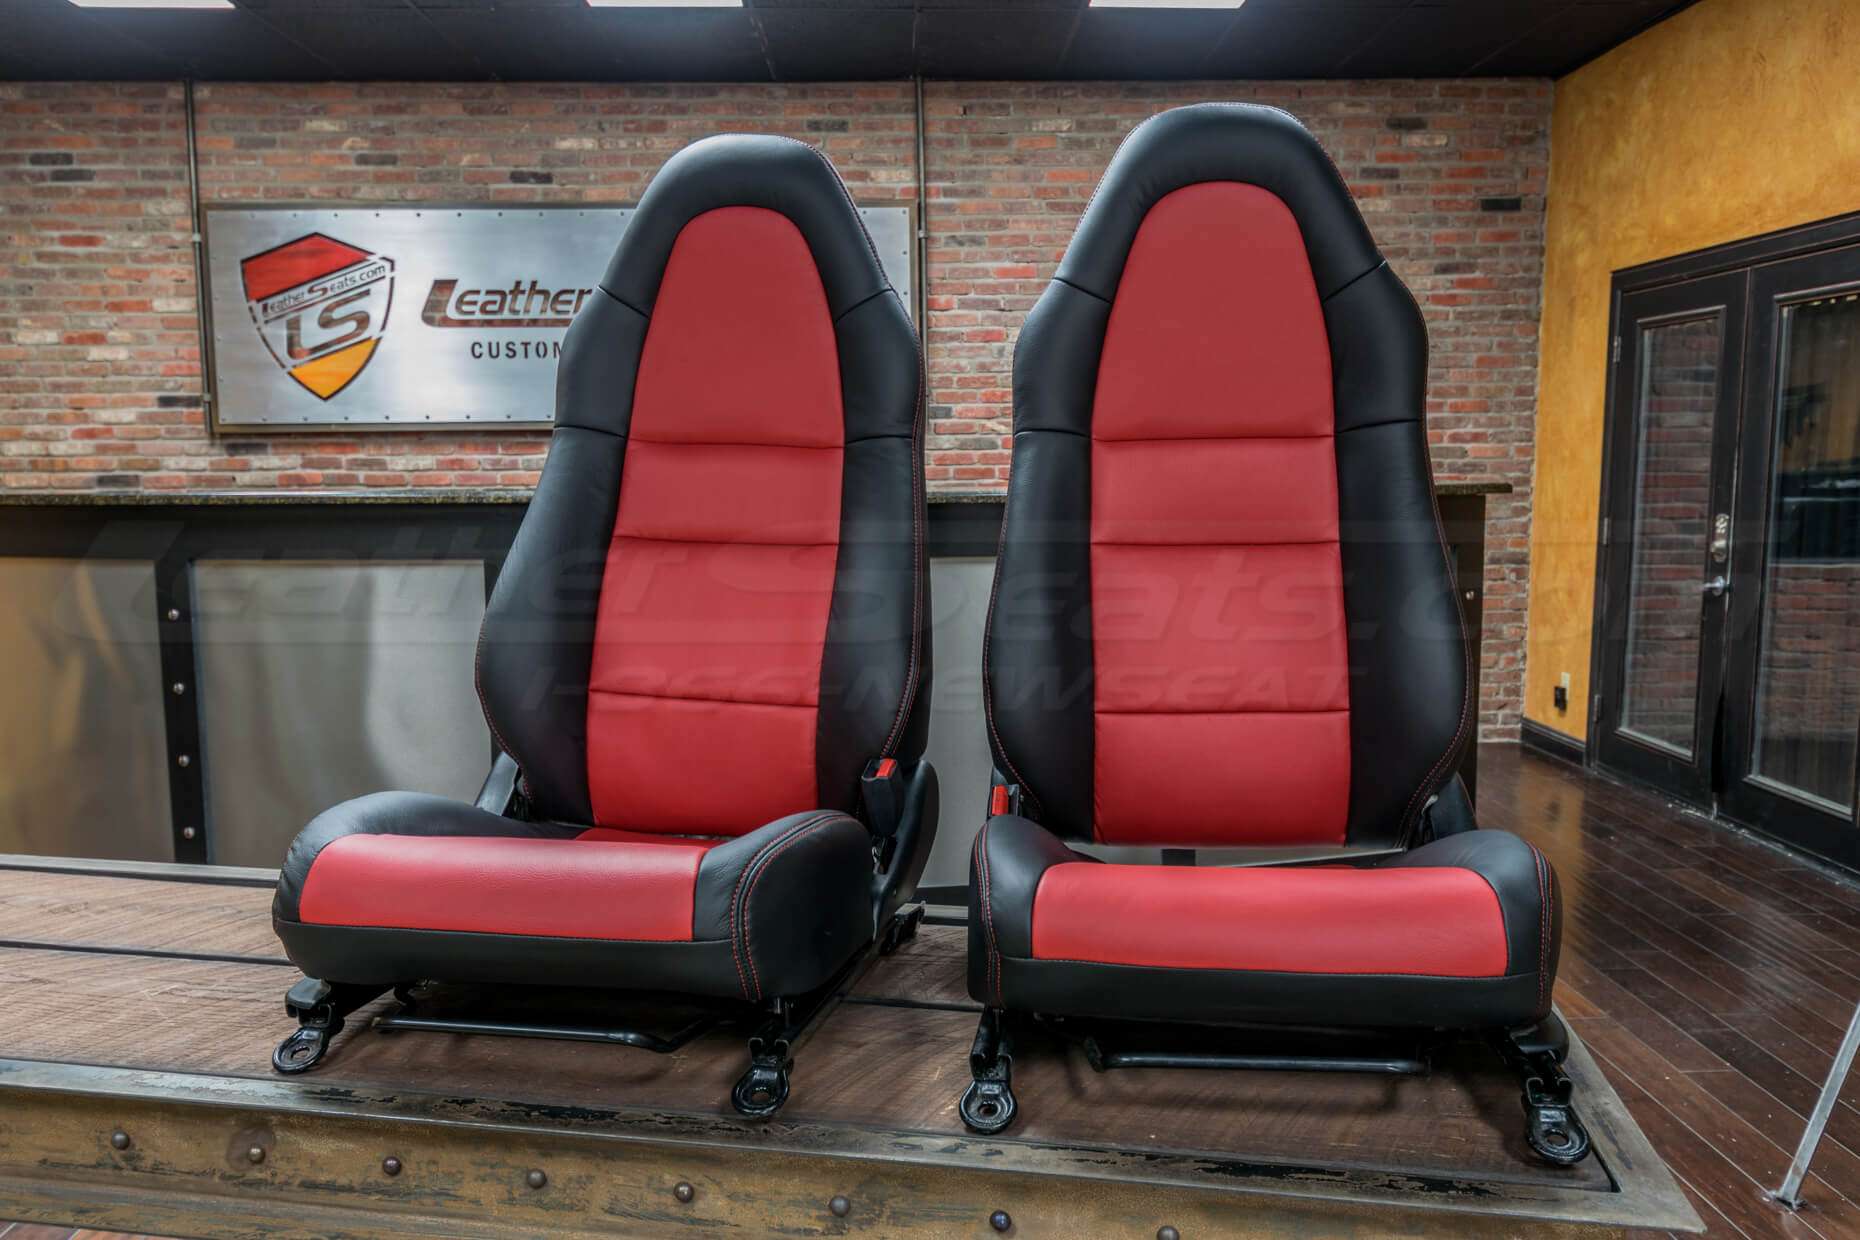 Toyota MR-2 leather seats - Black & Red - Front seats